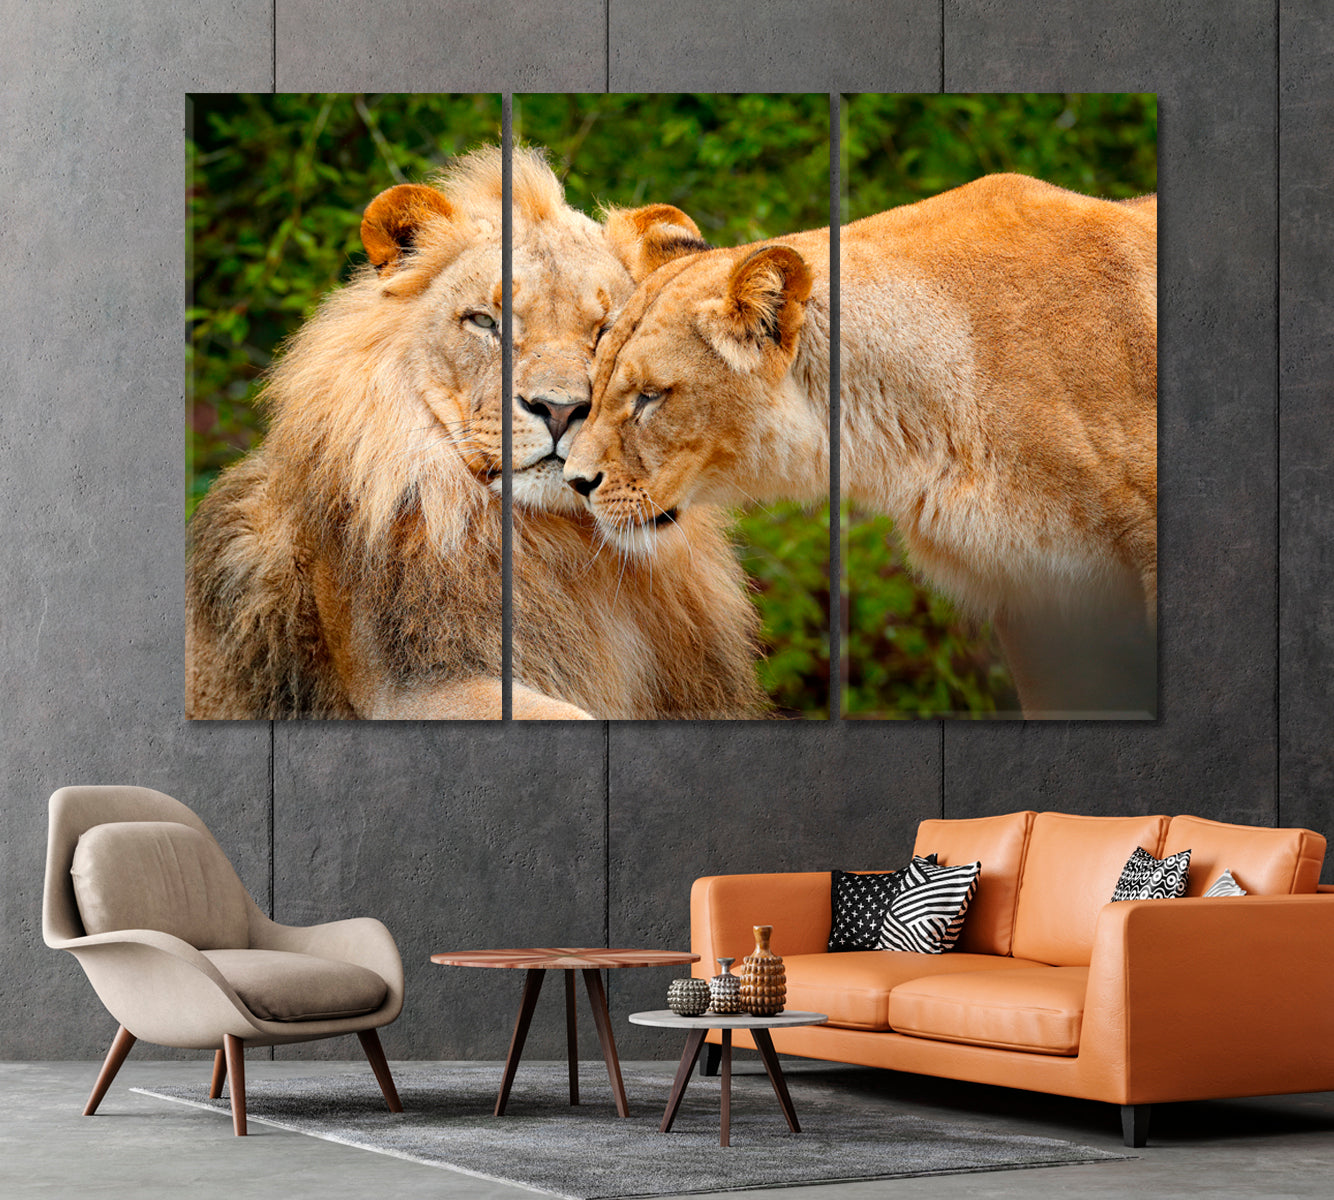 Pair of African Lions Chobe National Park Africa Canvas Print-Canvas Print-CetArt-1 Panel-24x16 inches-CetArt